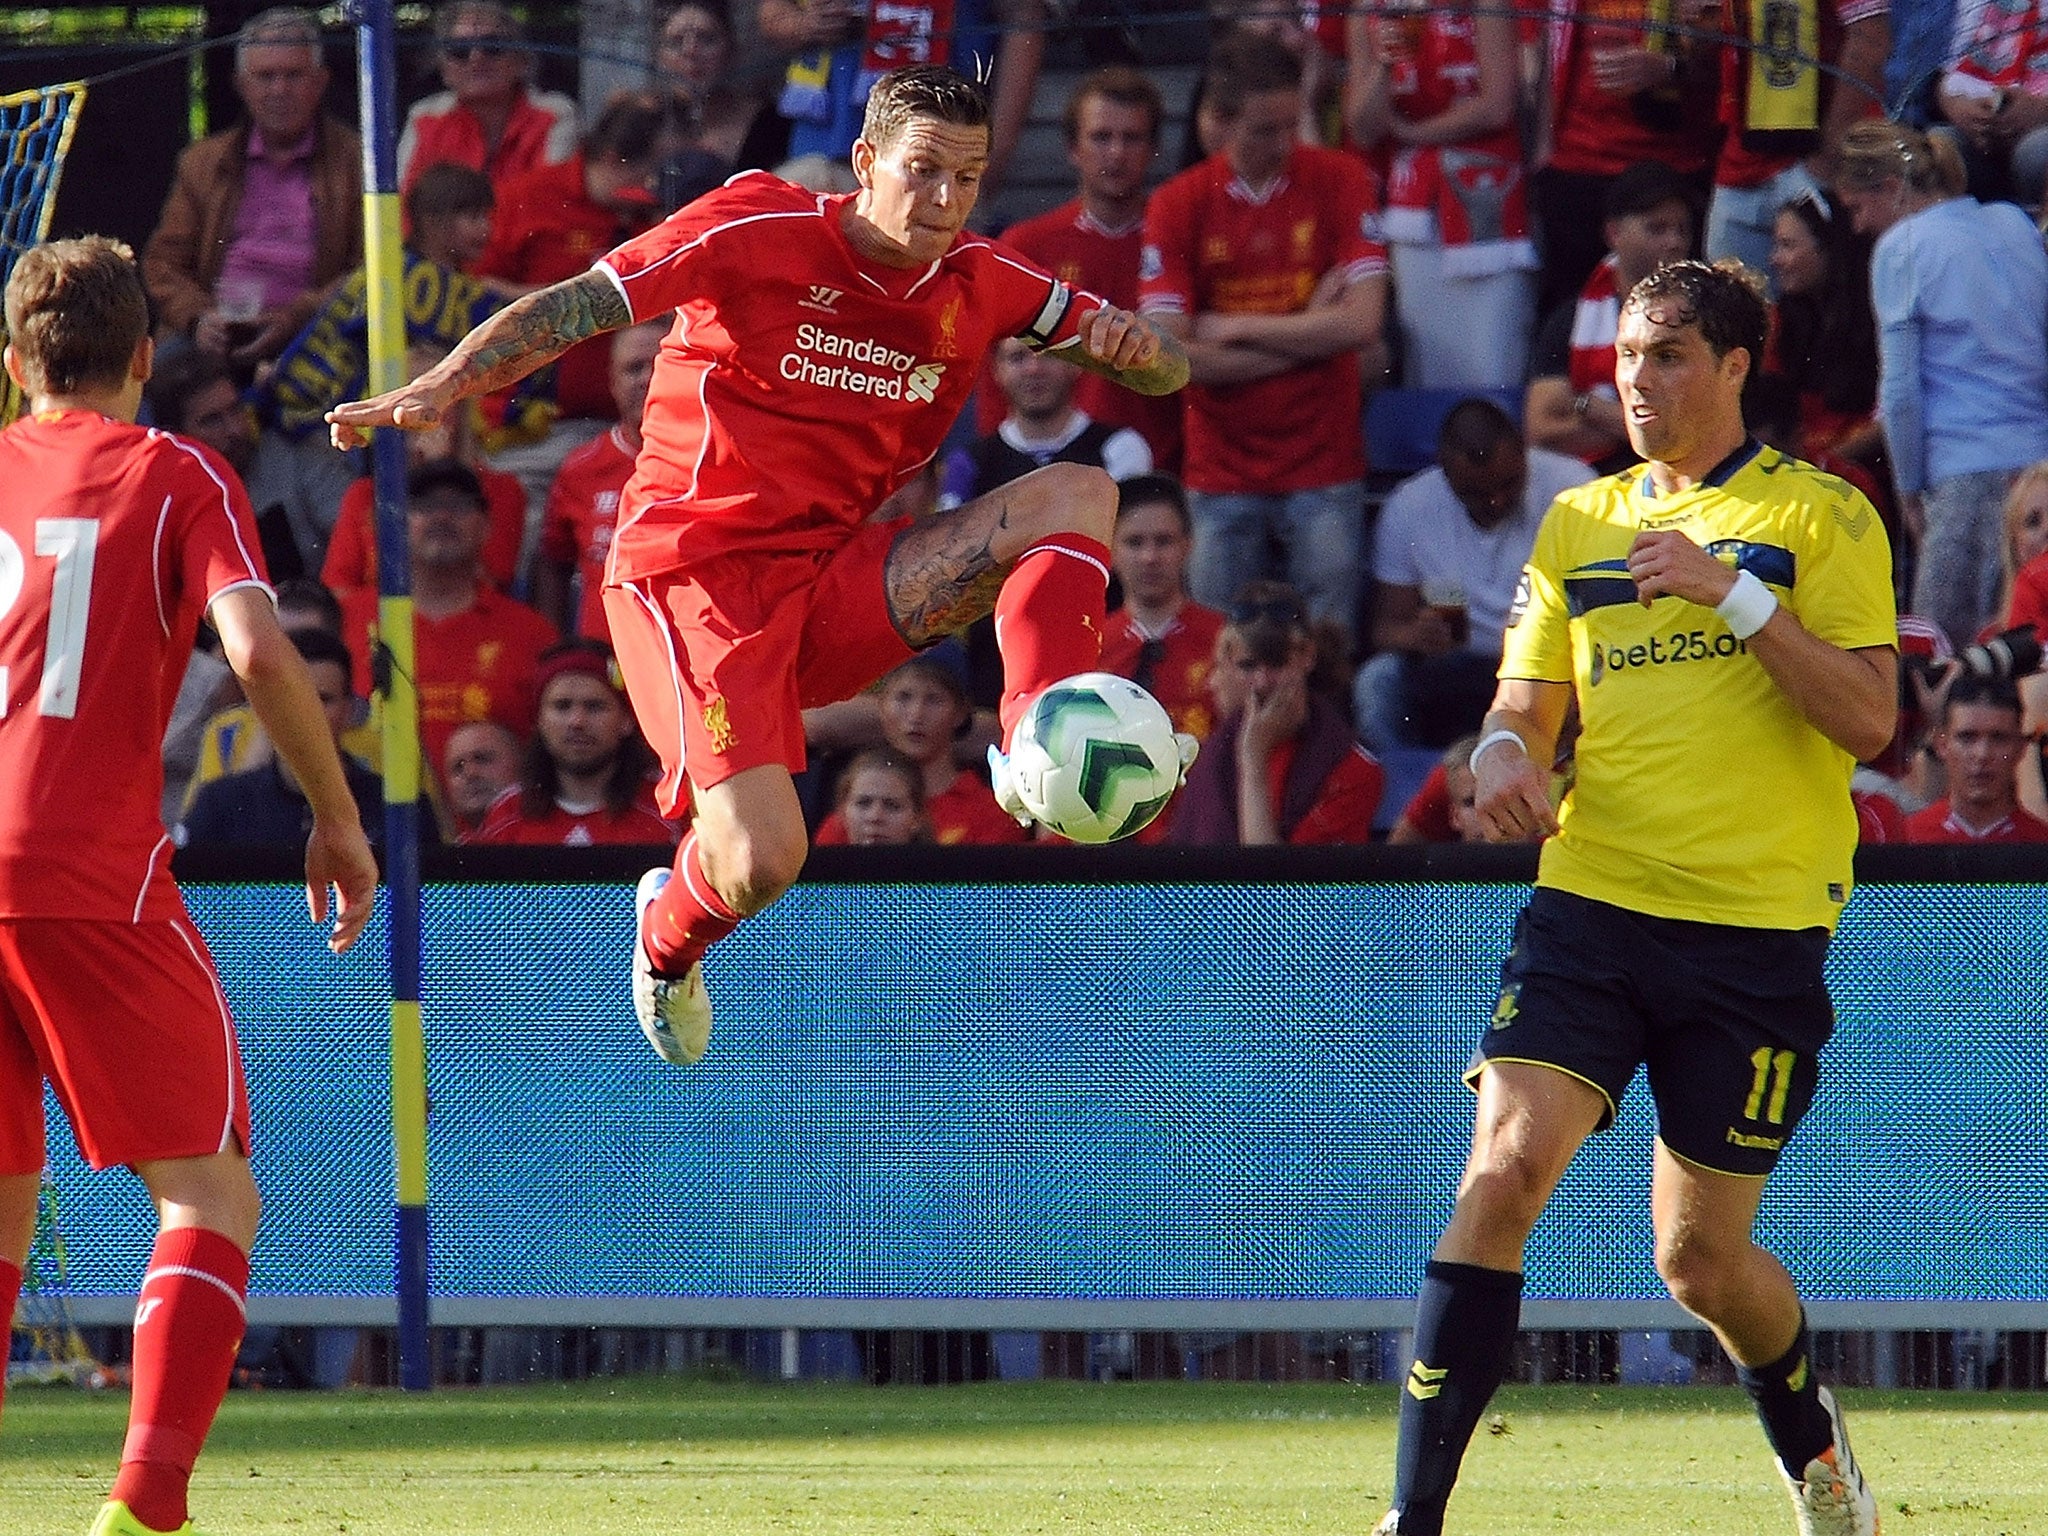 Daniel Agger in action during Liverpool's pre-season friendly defeat to Brondby